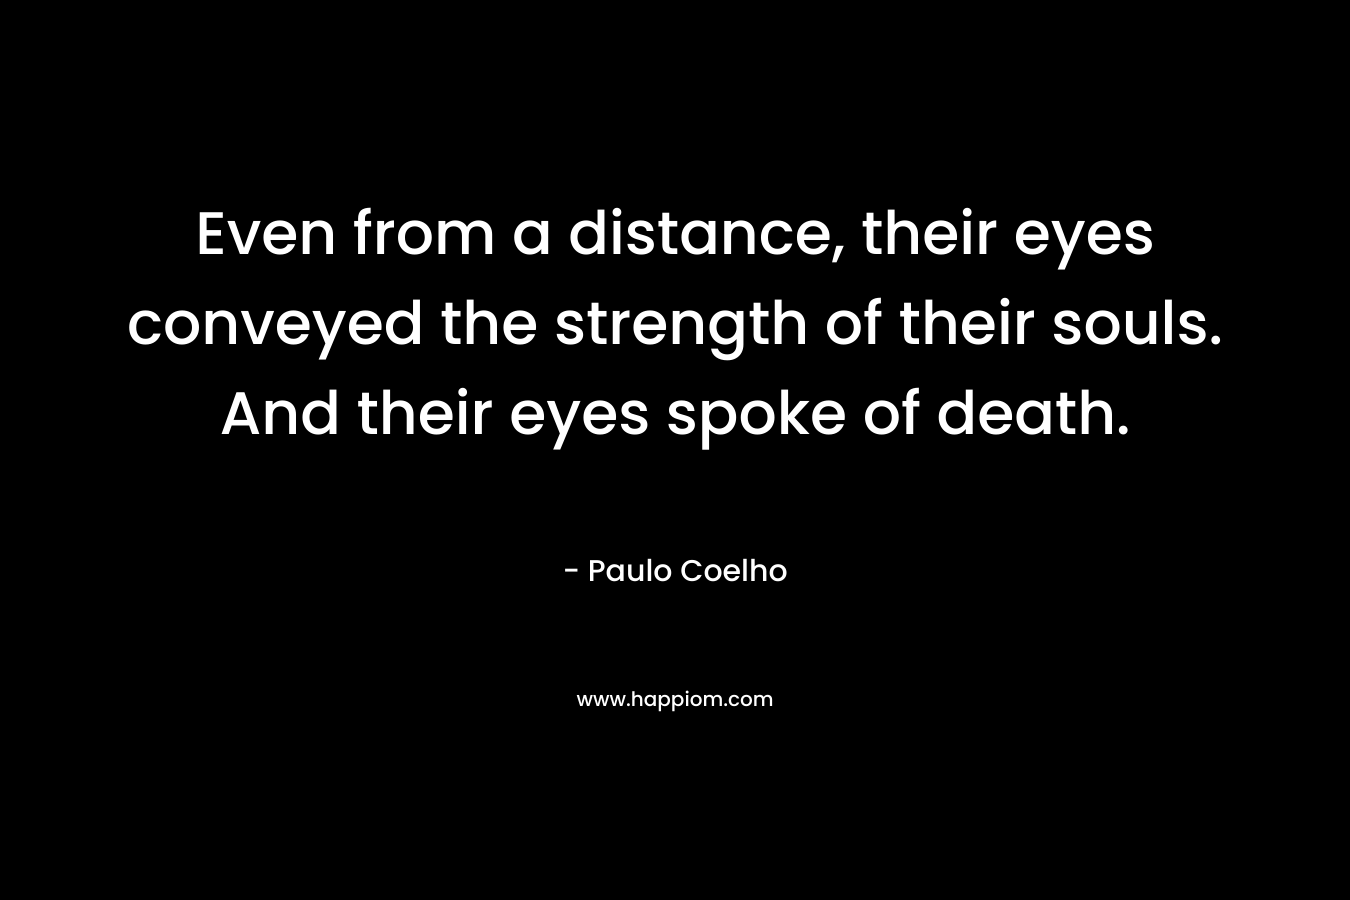 Even from a distance, their eyes conveyed the strength of their souls. And their eyes spoke of death. – Paulo Coelho